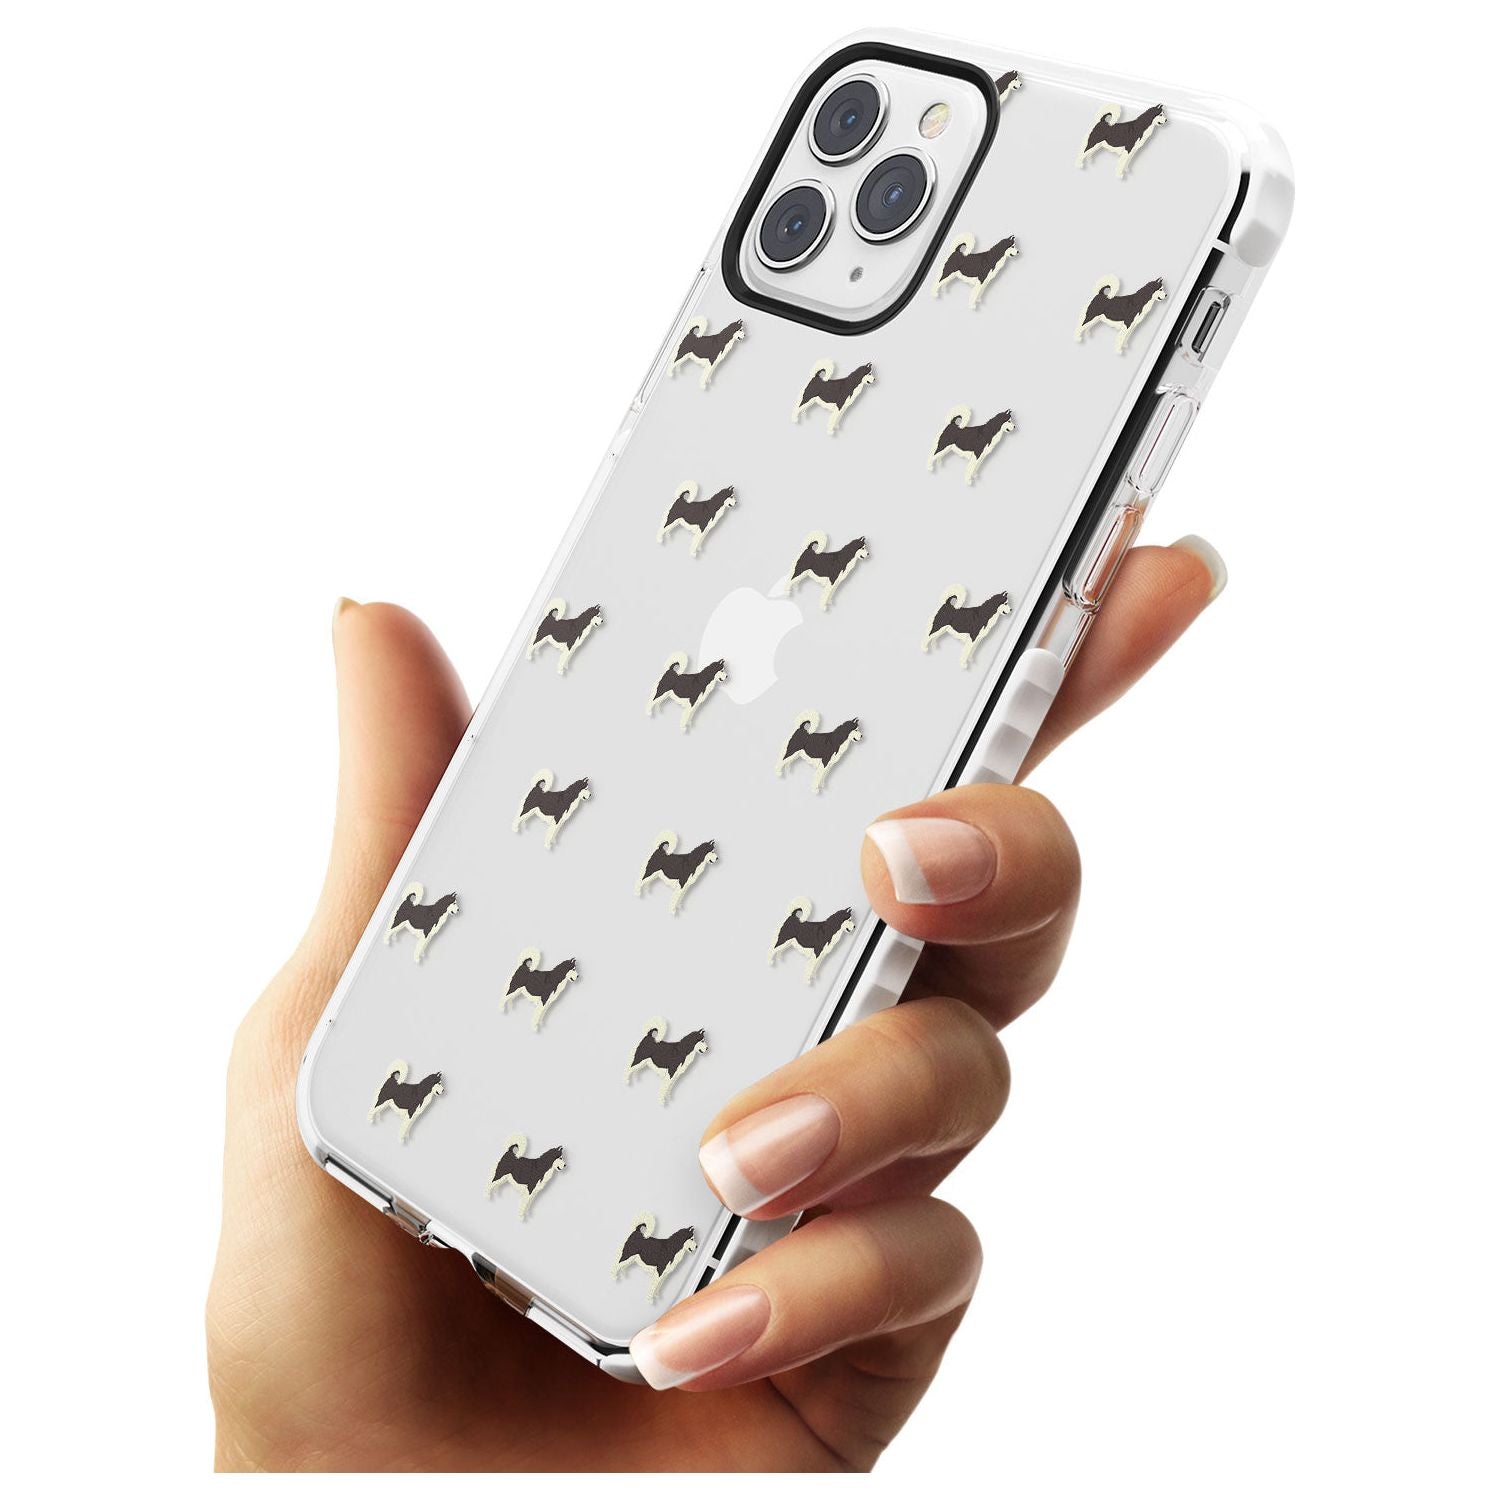 Alaskan Malamute Dog Pattern Clear Impact Phone Case for iPhone 11 Pro Max